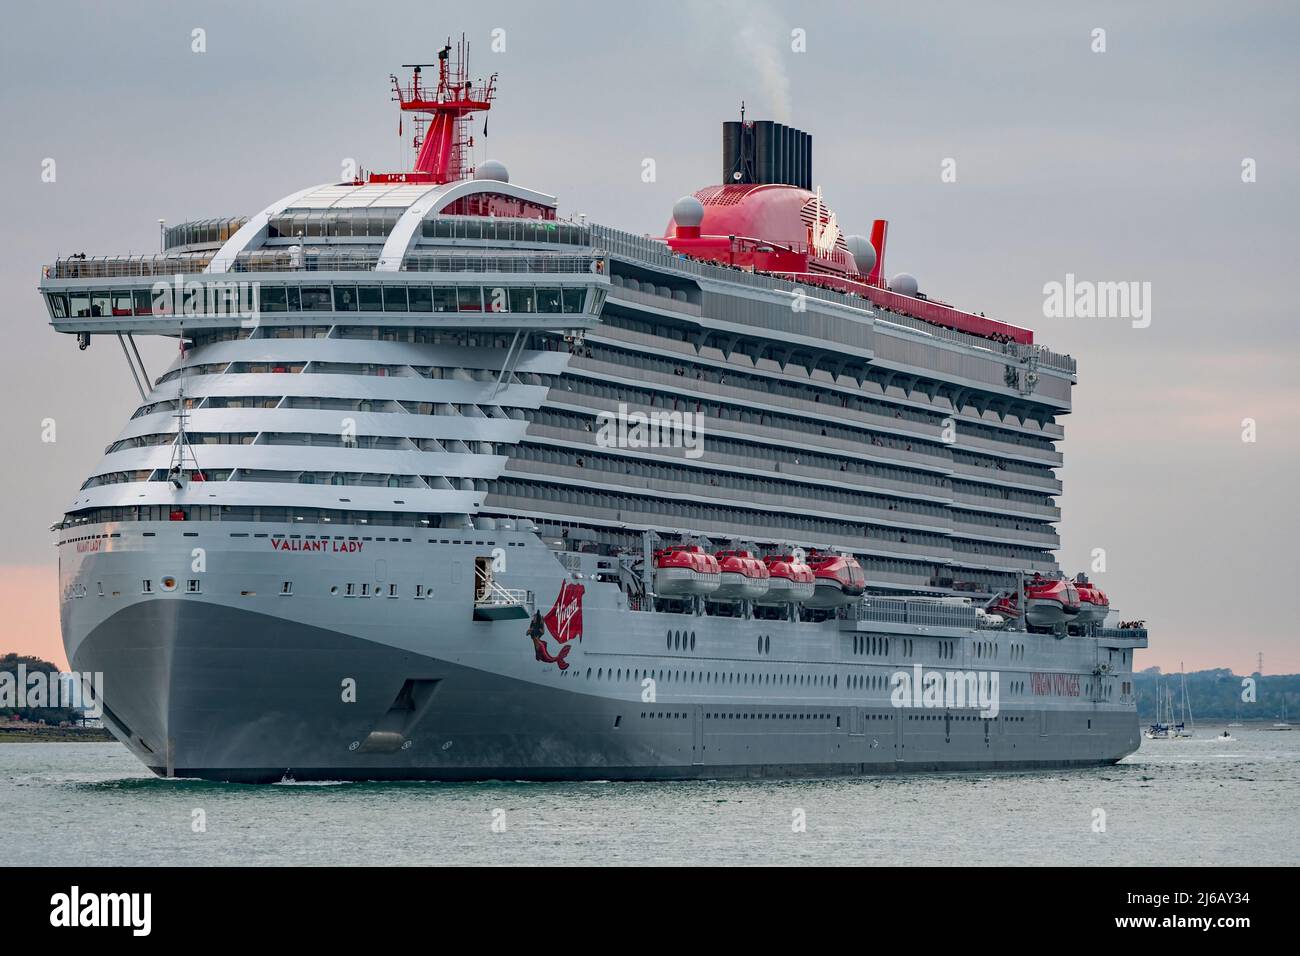 The Virgin Voyages cruise ship Valiant Lady departed Portsmouth, UK on the 29th April 2022 for a short European cruise. Stock Photo